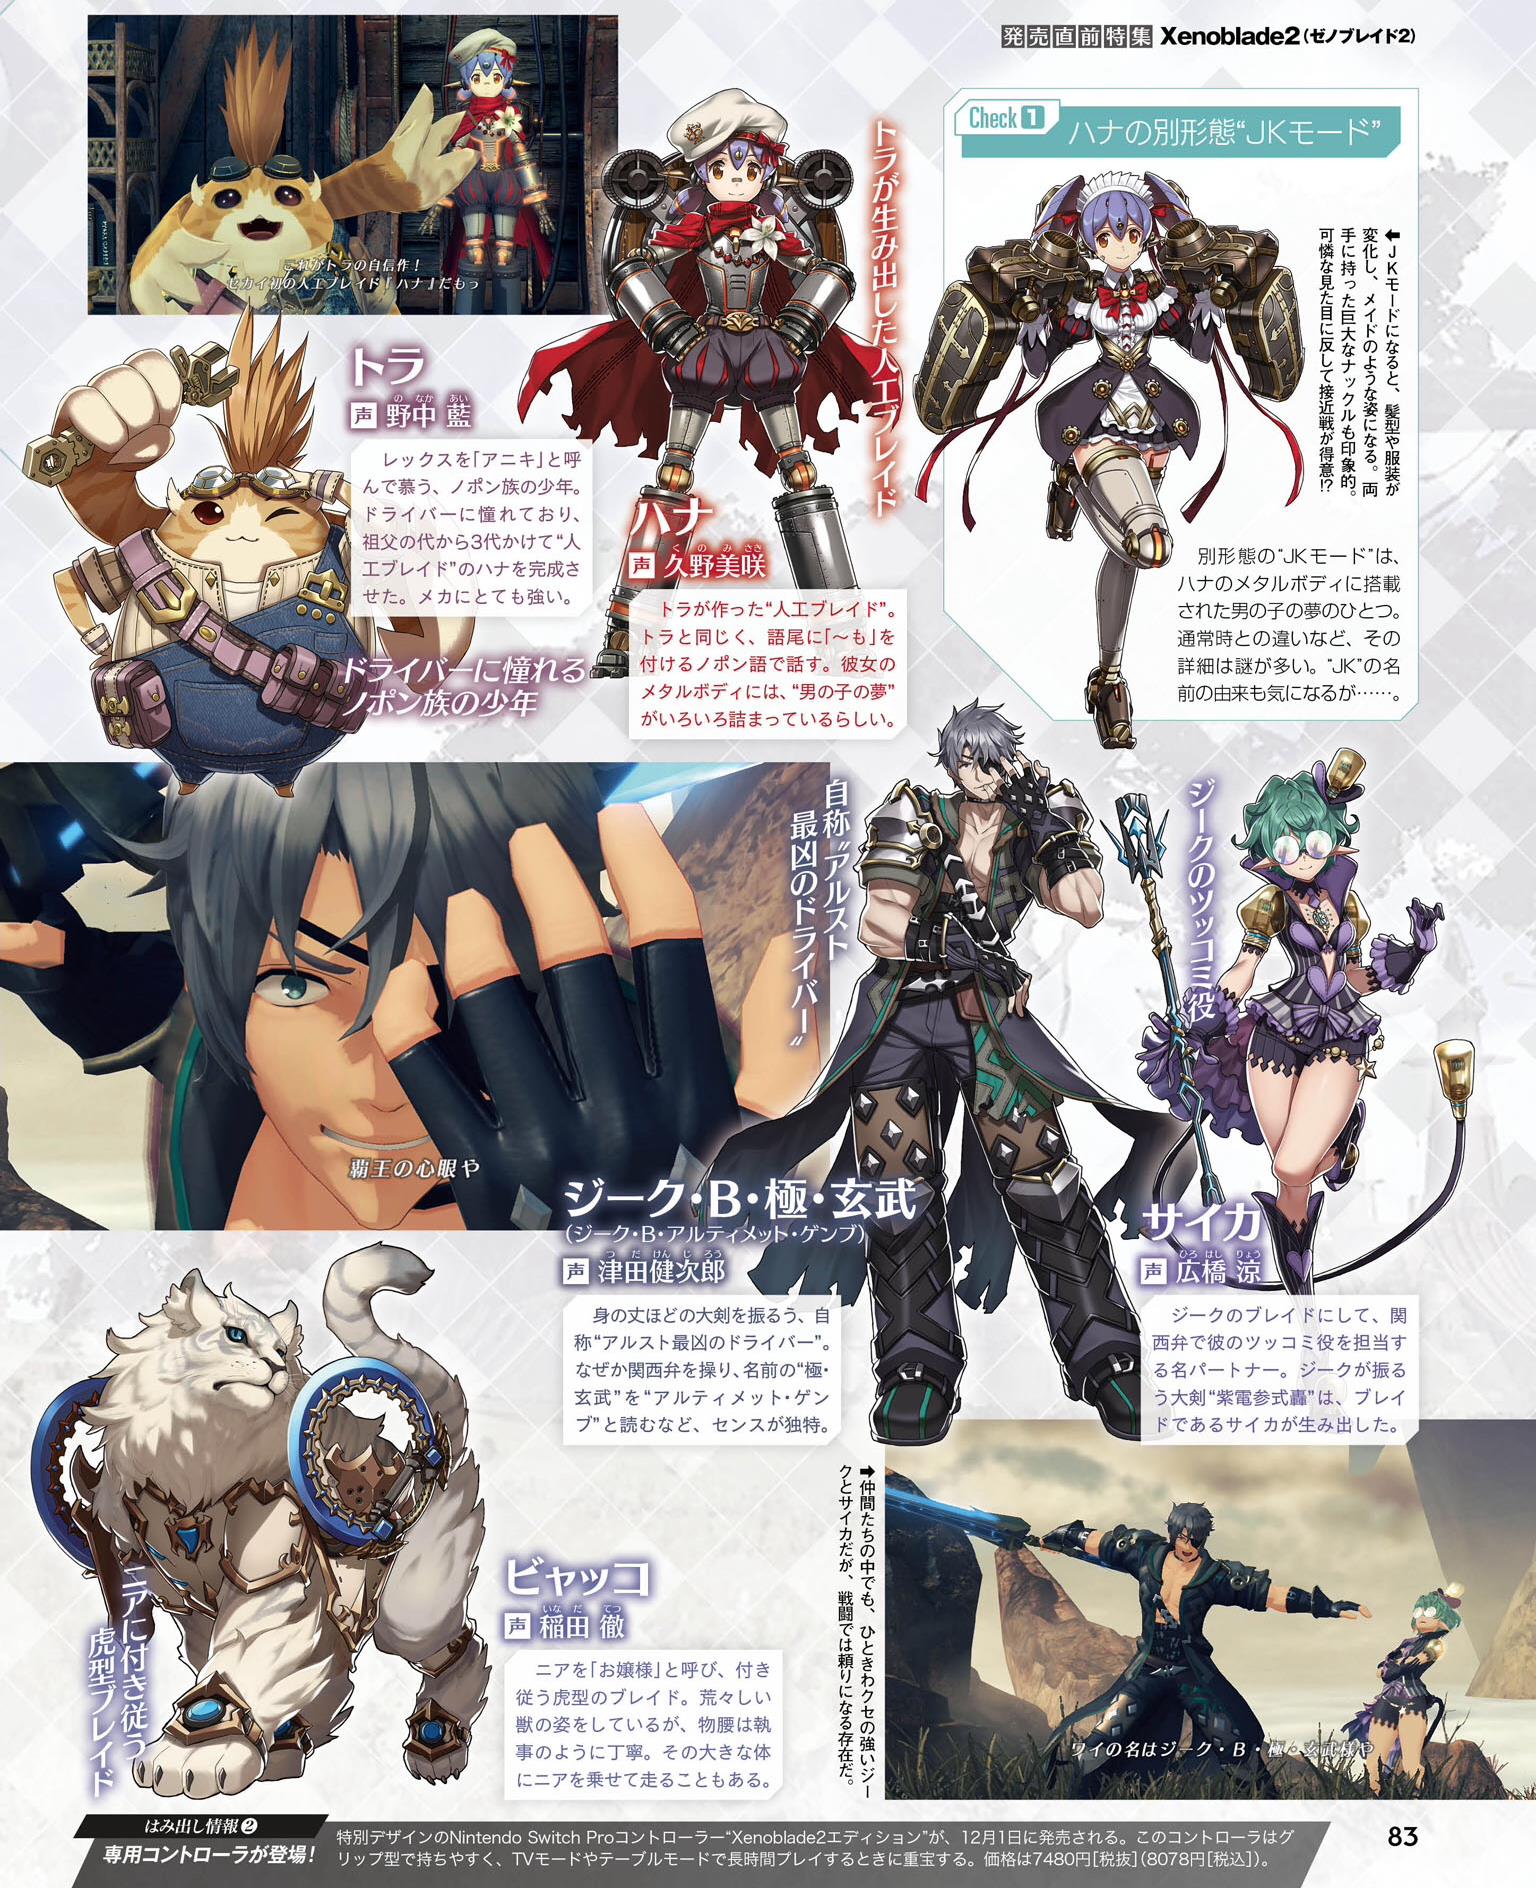 Scans roundup - Valkyrie Chronicles 4, Xenoblade Chronicles 2